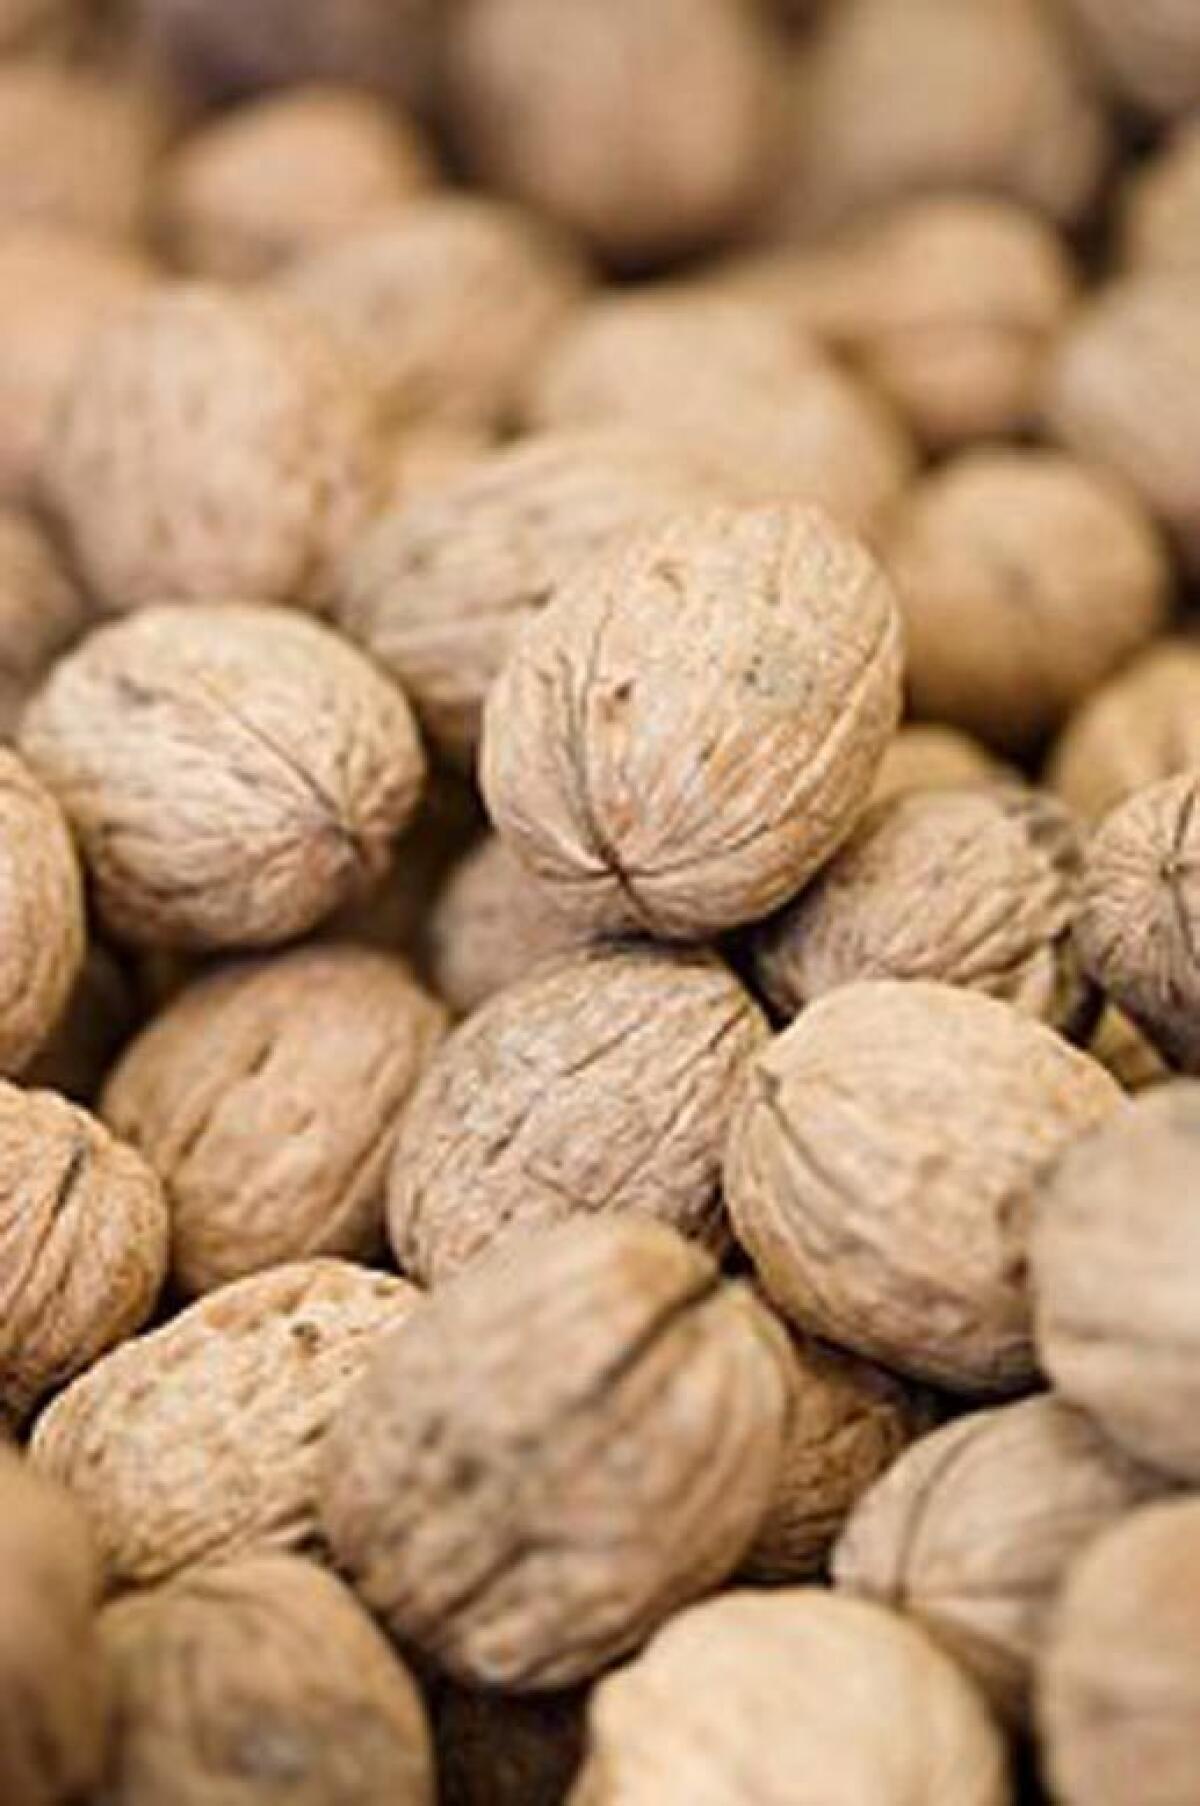 Get fresh walnuts now, while the meat is sweet and slightly creamy.